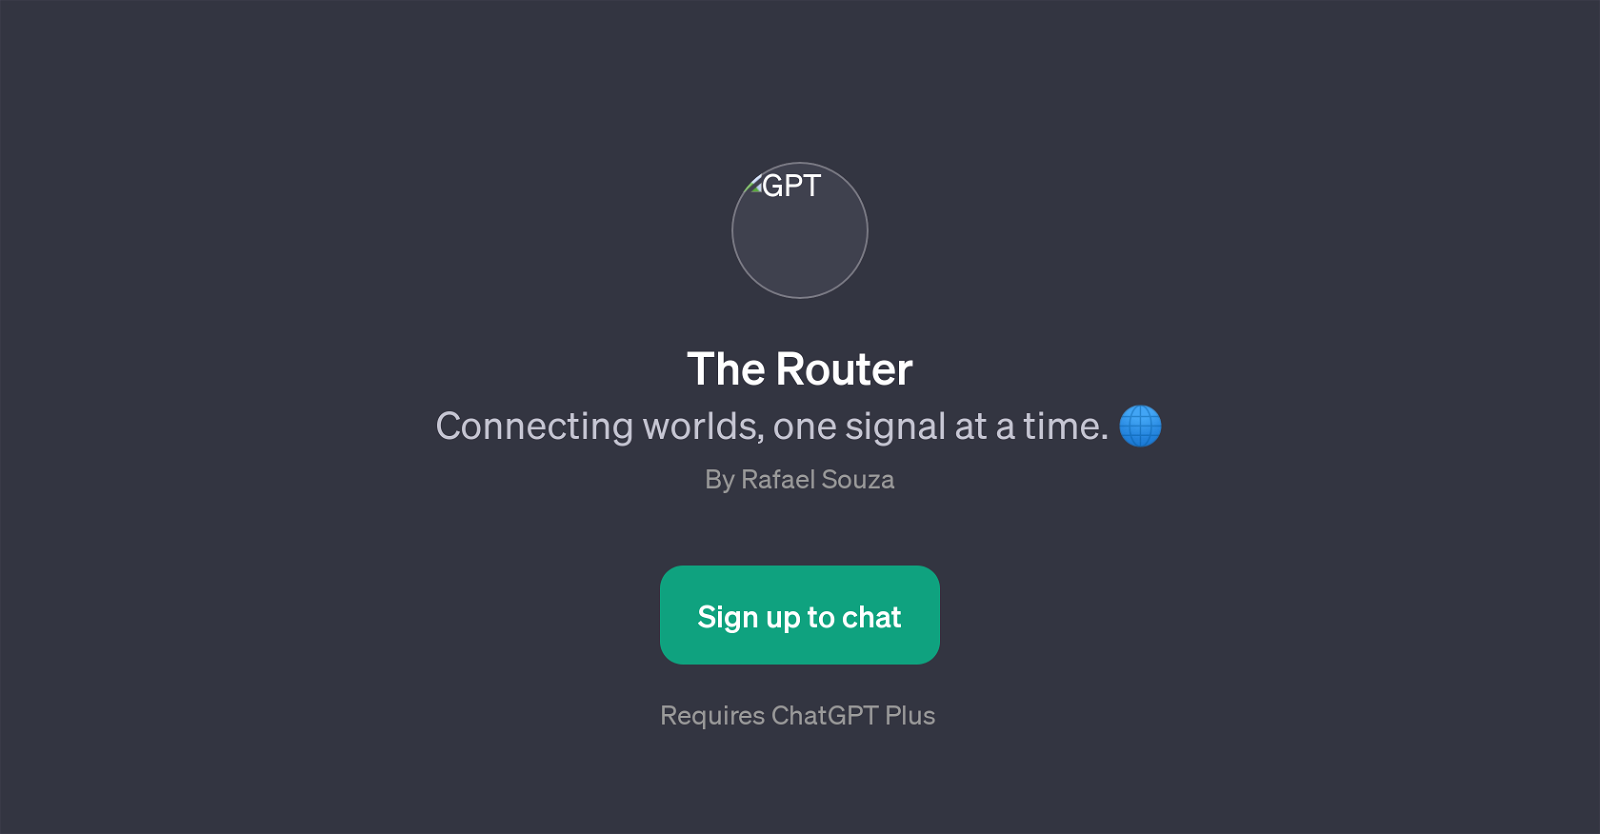 The Router website